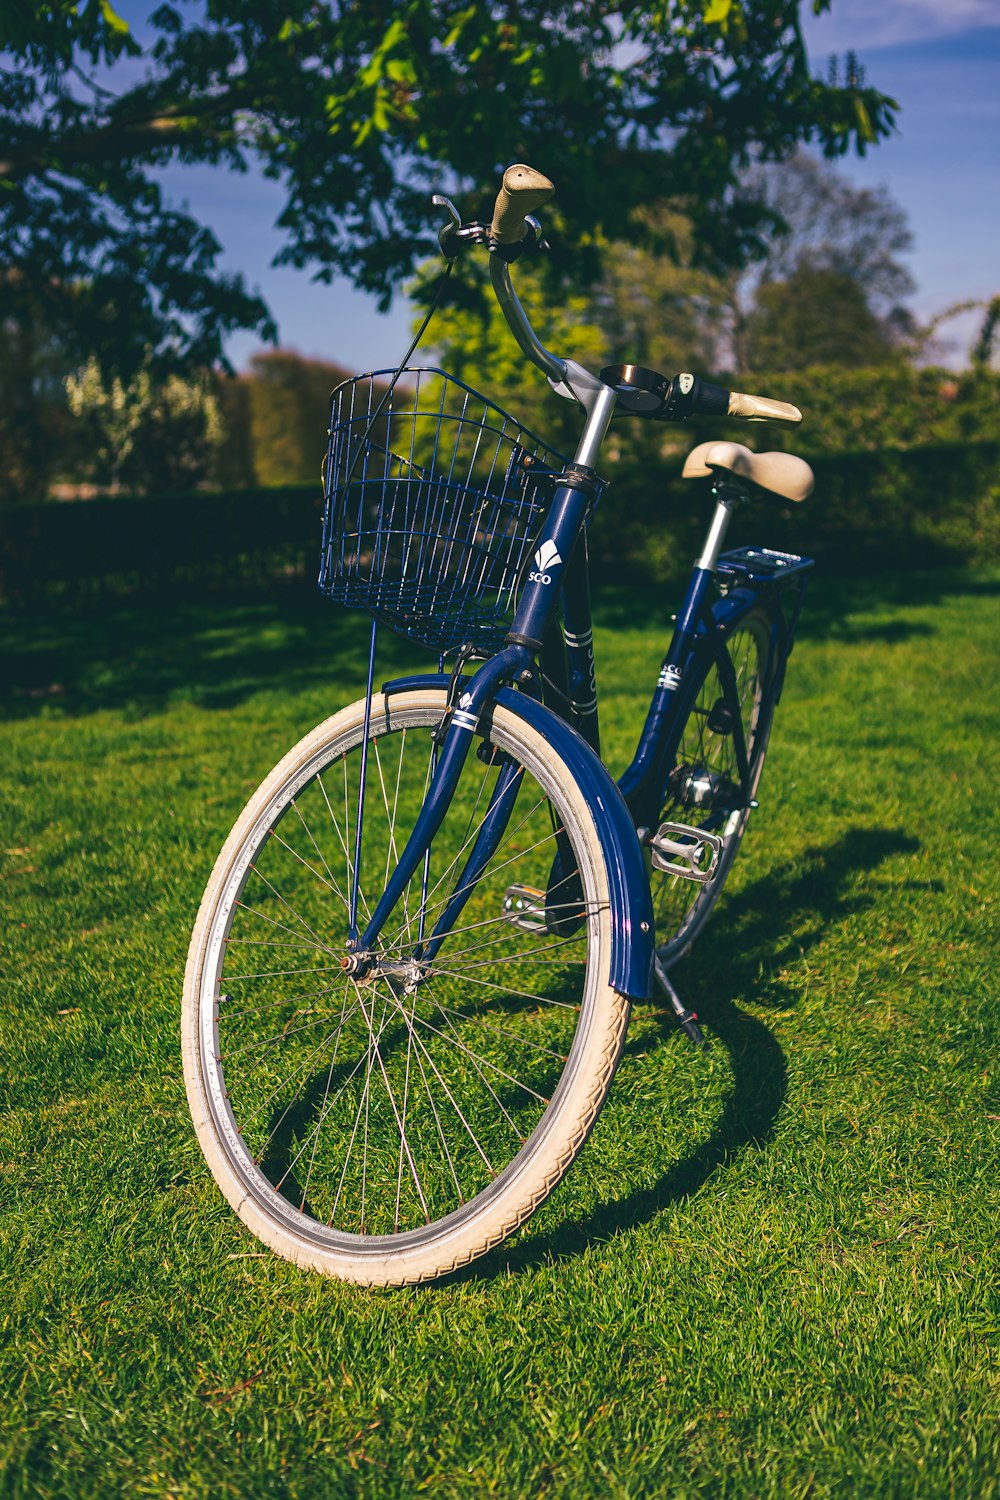 a bicycle with a basket on the front parked in a grassy area